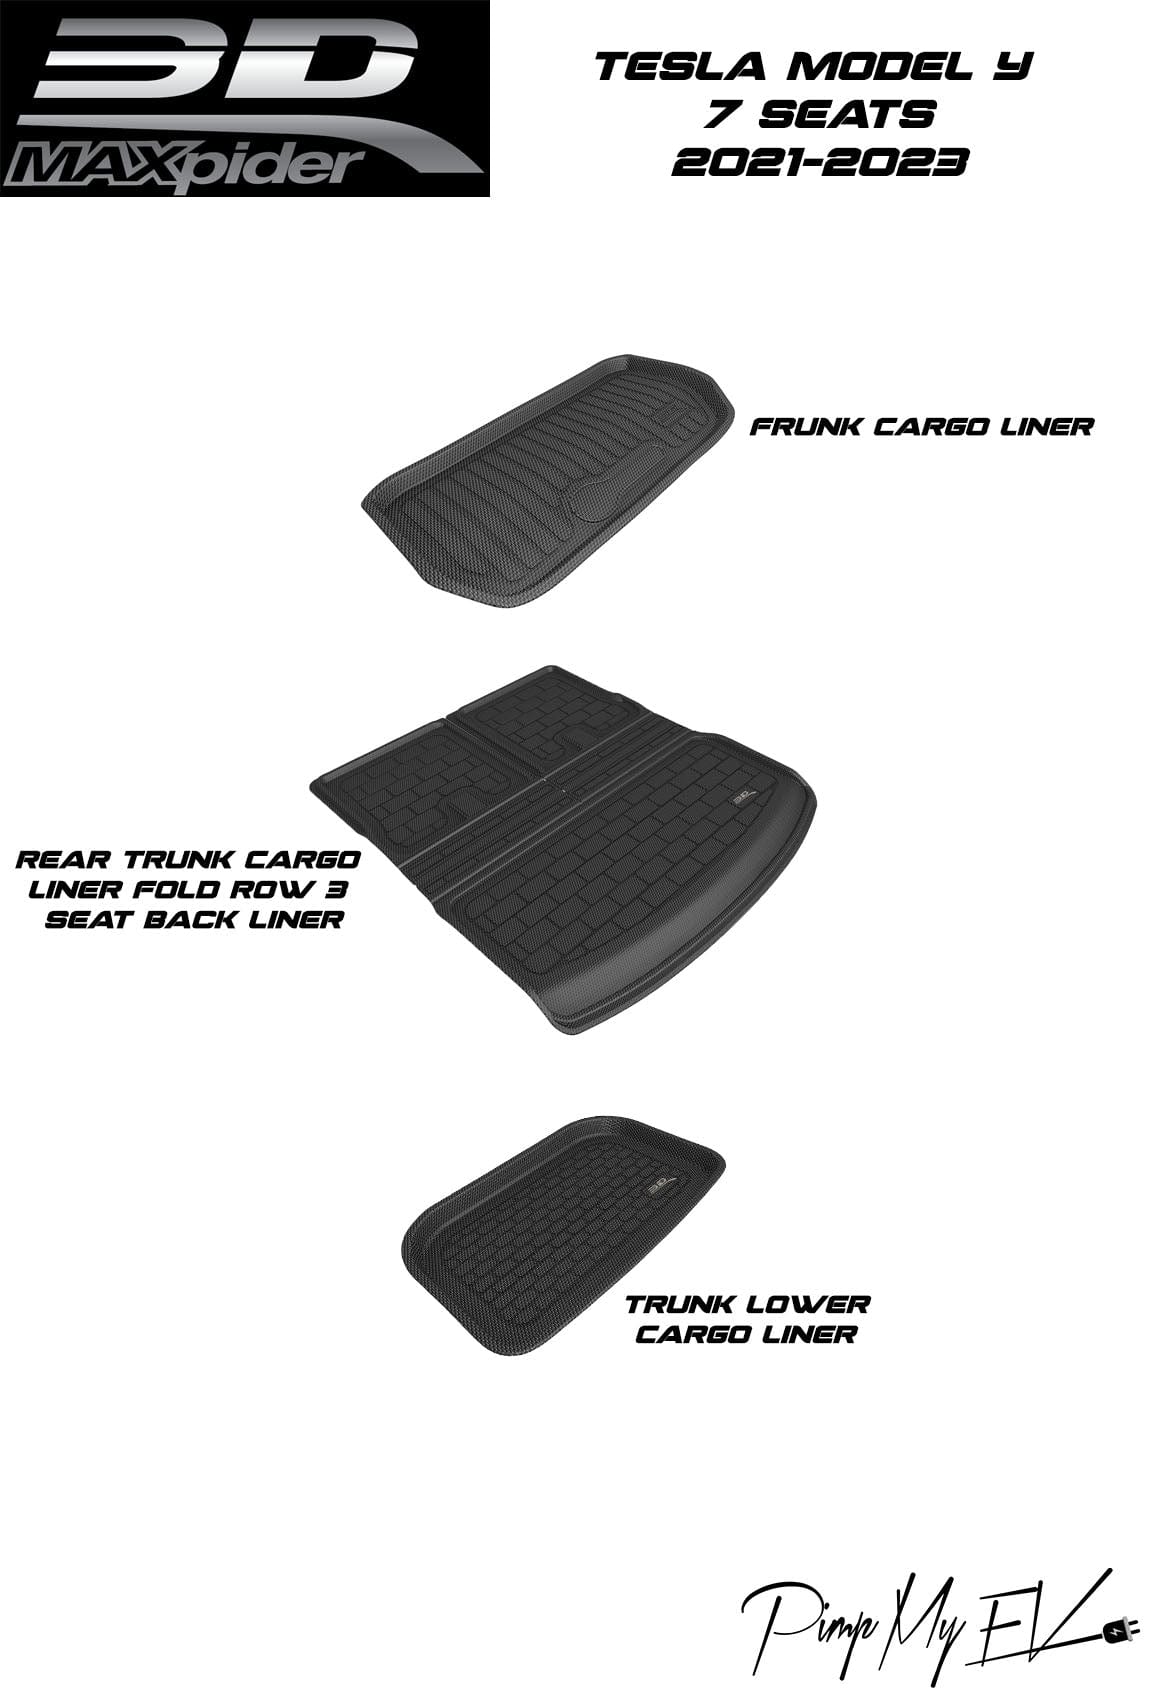 Floor Mats Liner for Car 3D All-Weather Front Rear Trimmable 4 Pcs